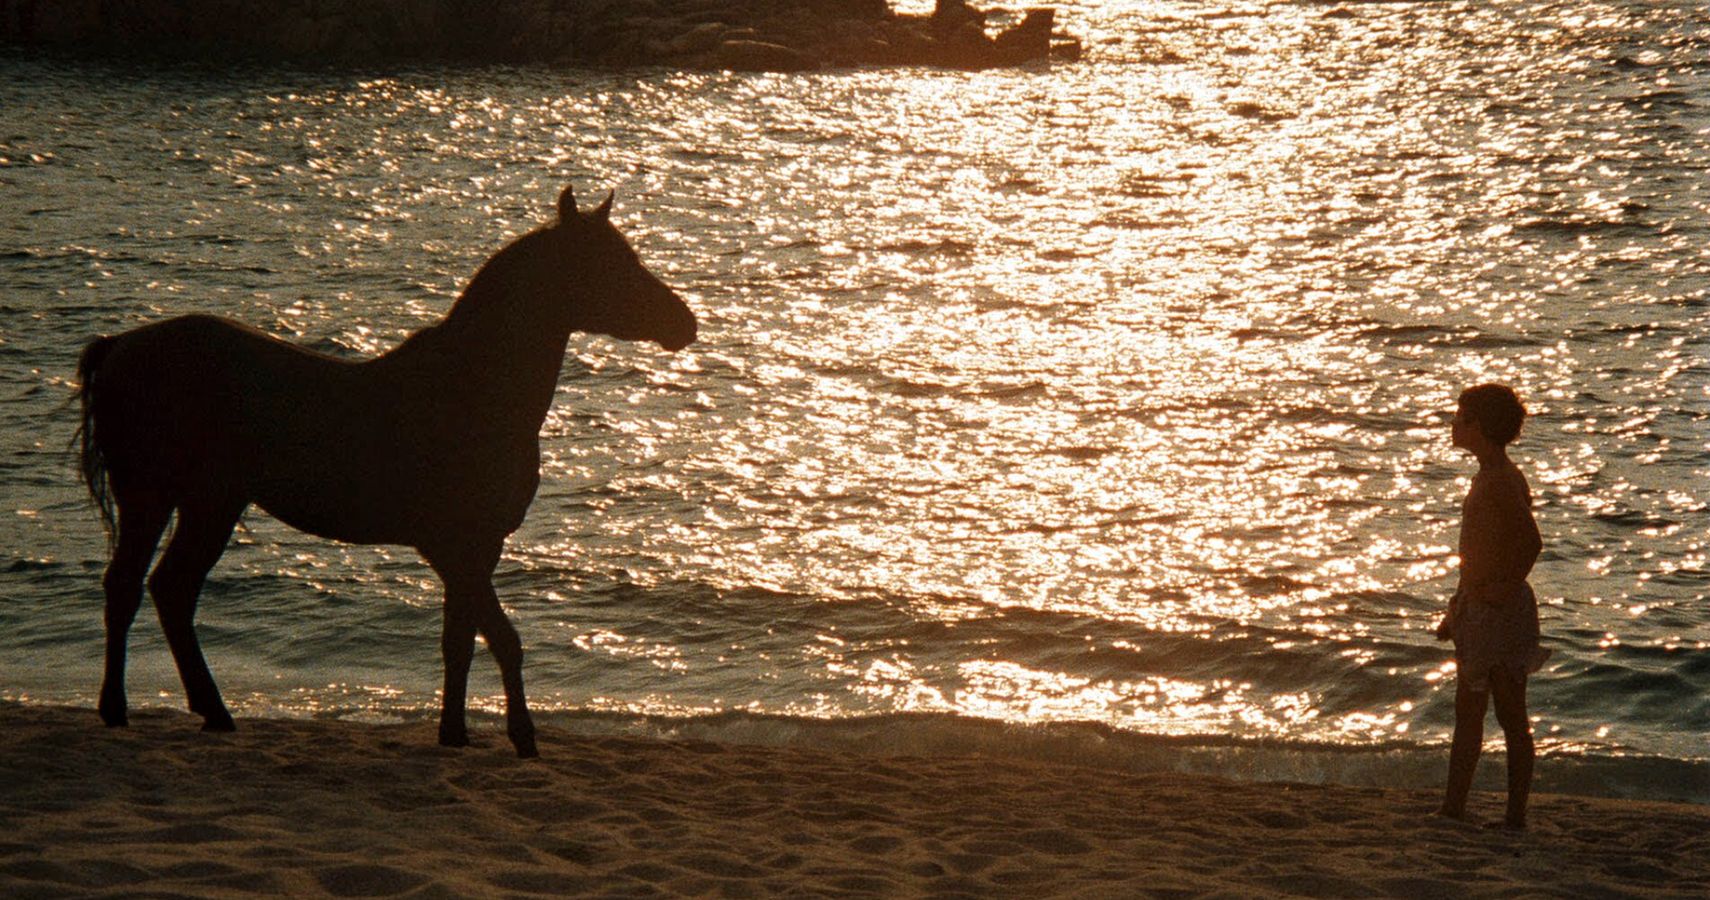 A young child looking at a horse while on the beach in the movie The Black Stallion